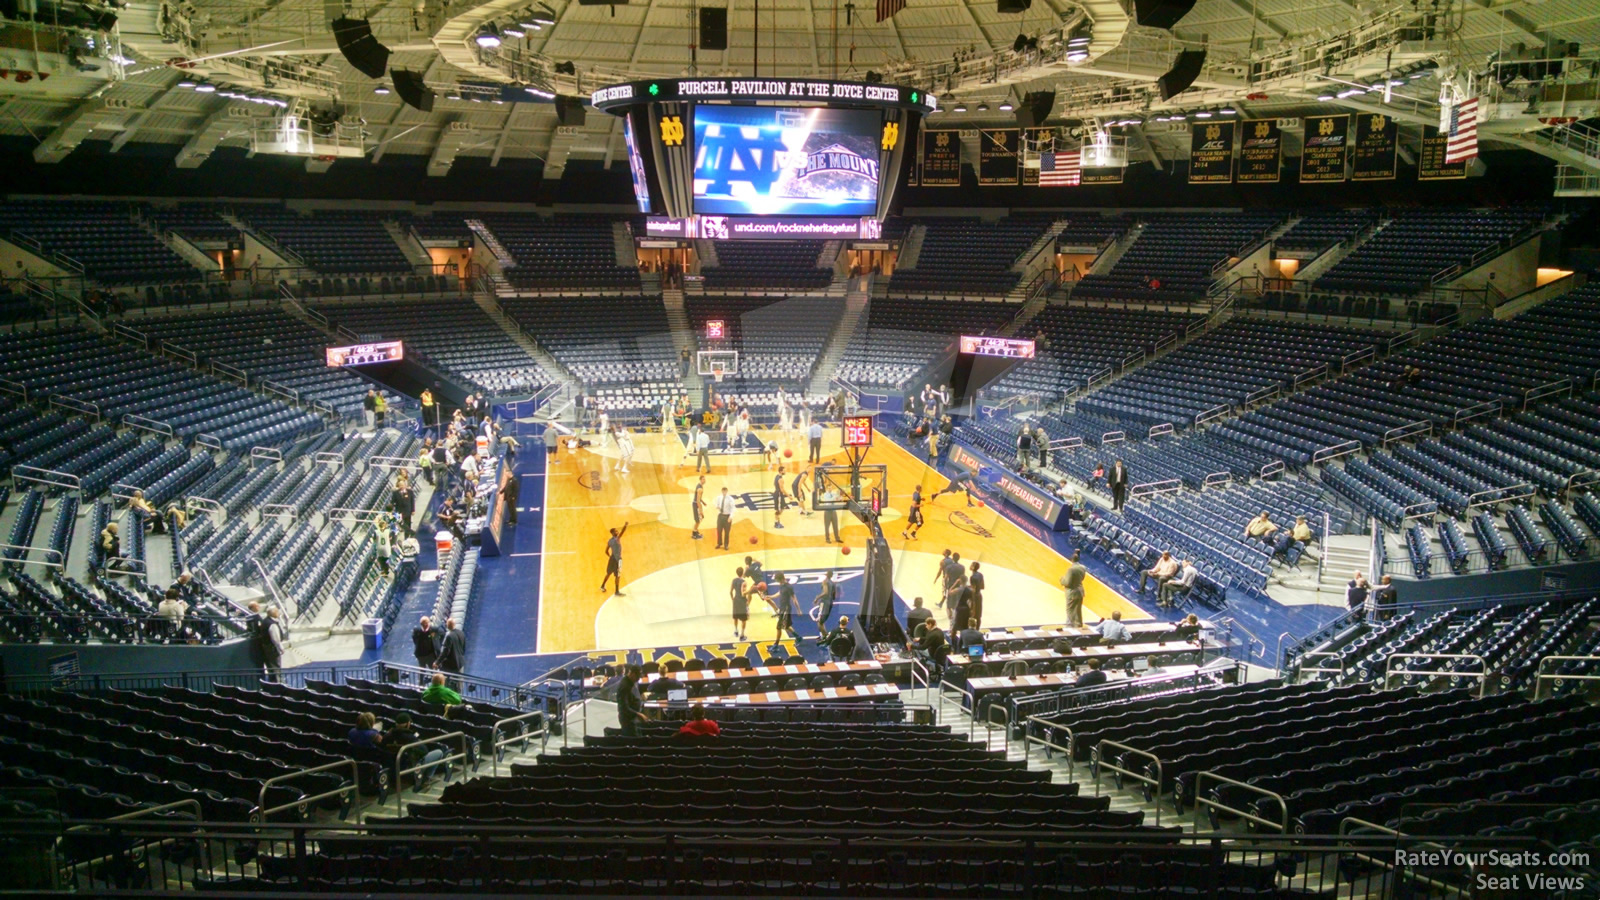 section 115, row 10 seat view  - joyce center